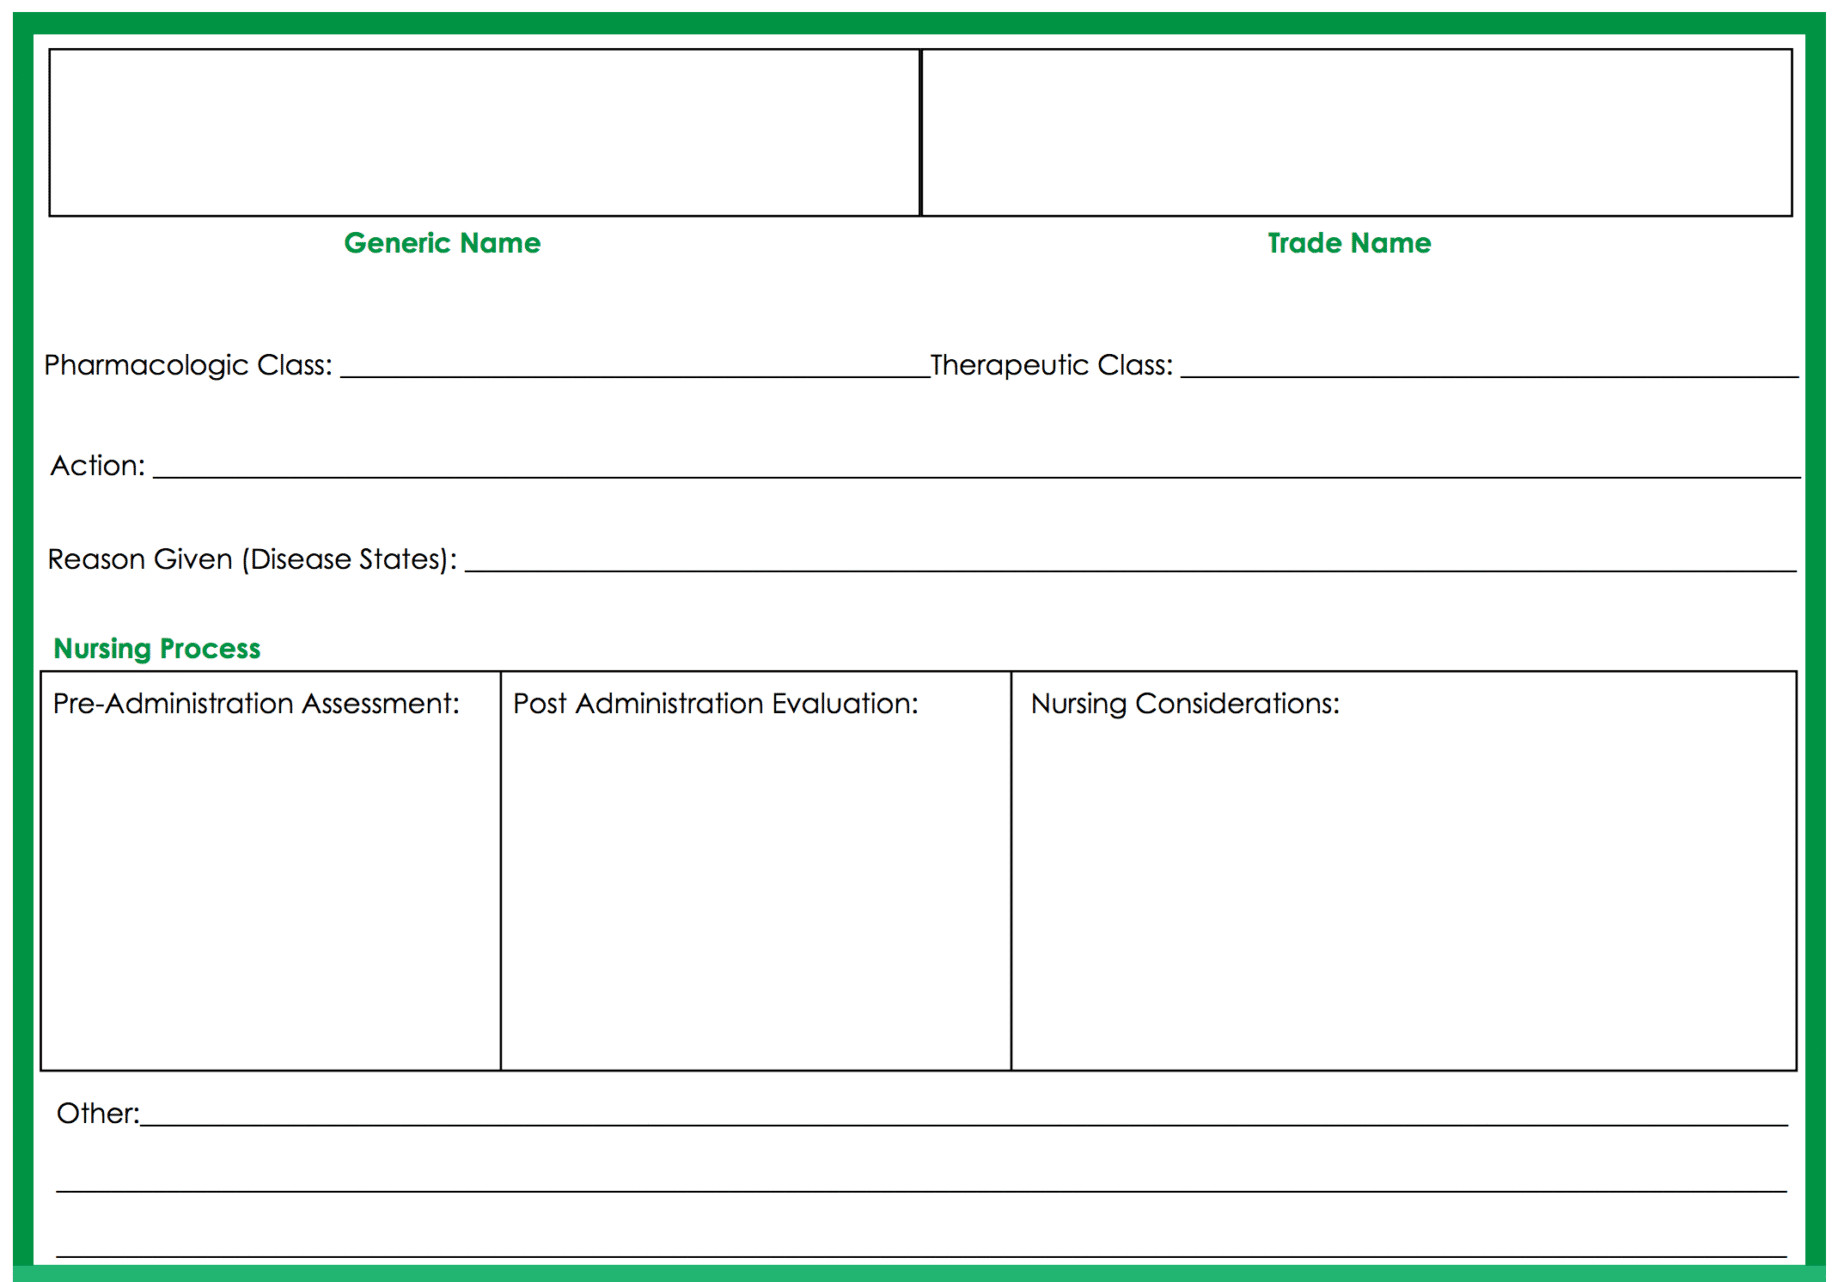 drug cards template - Cicim In Pharmacology Drug Card Template